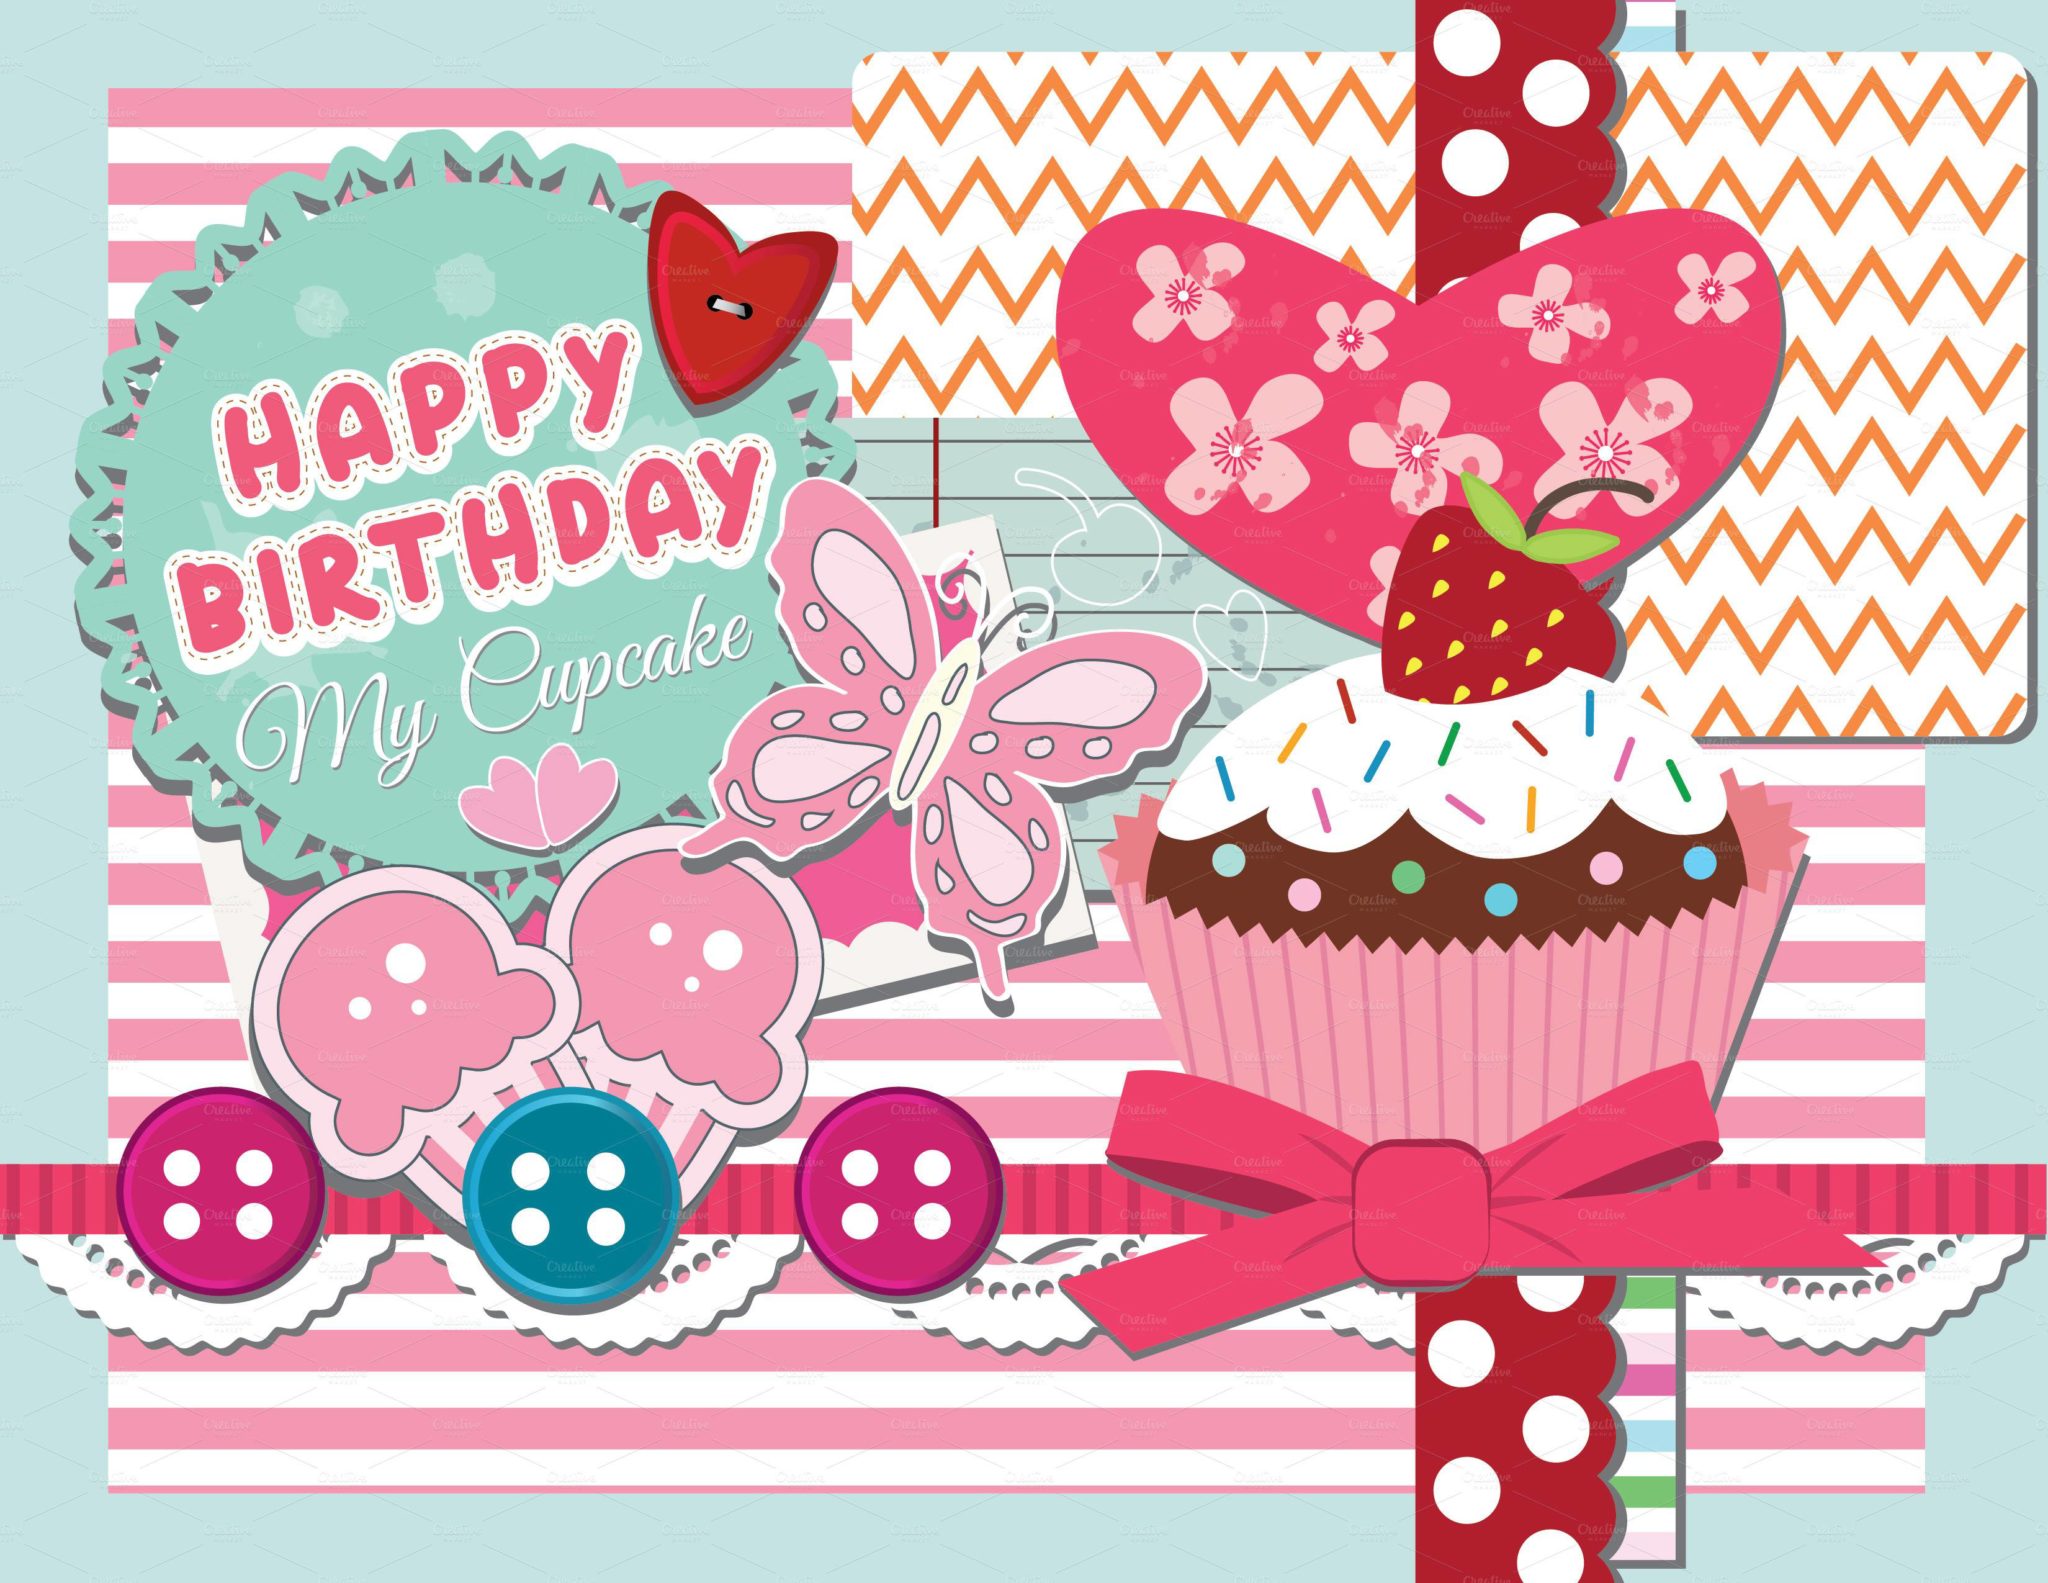 Happy Birthday Cards for Girls - Birthday cards Images